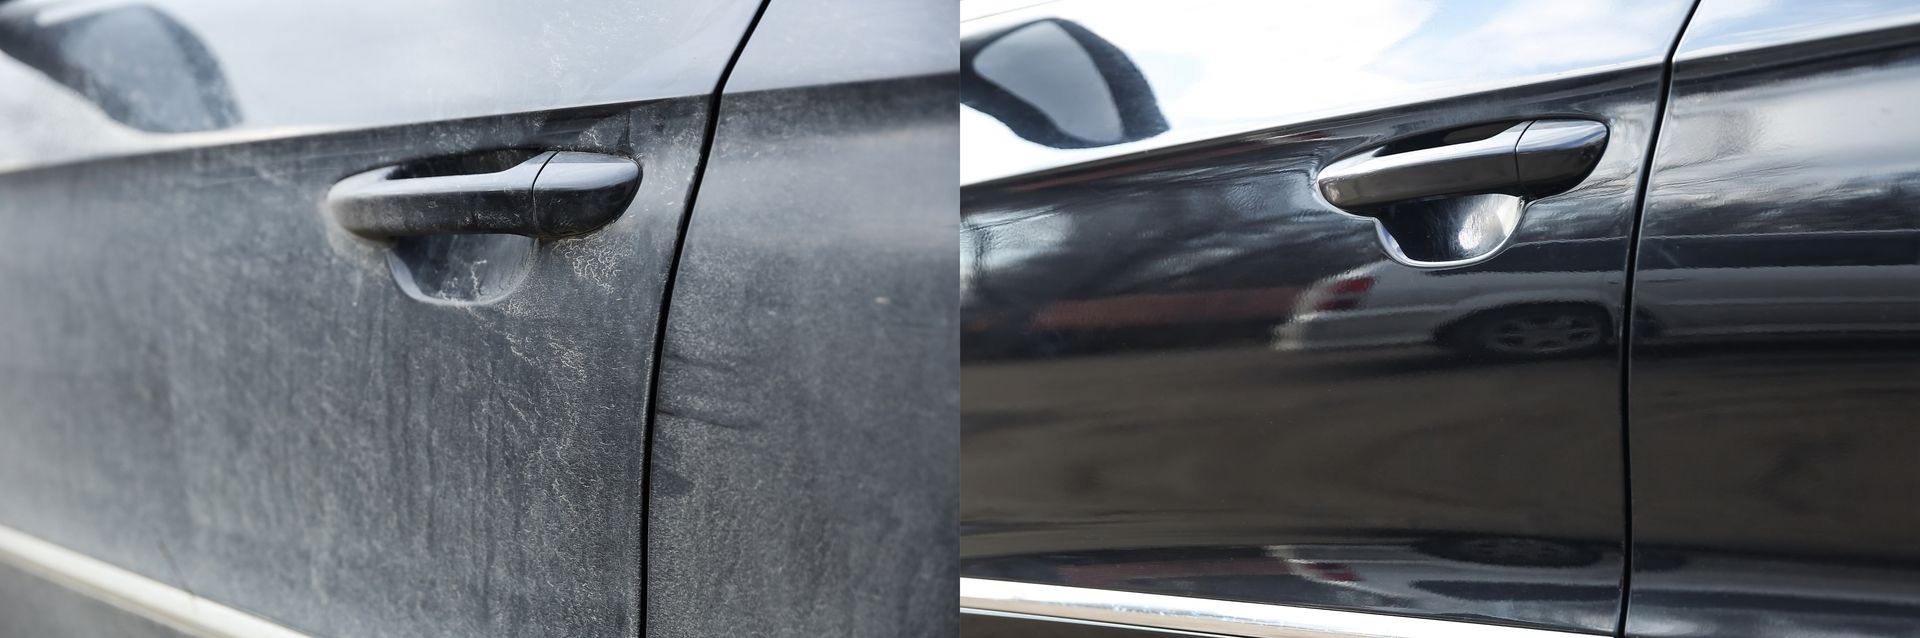 Ocala Car Detailing Before and After Picture of a dirty car.